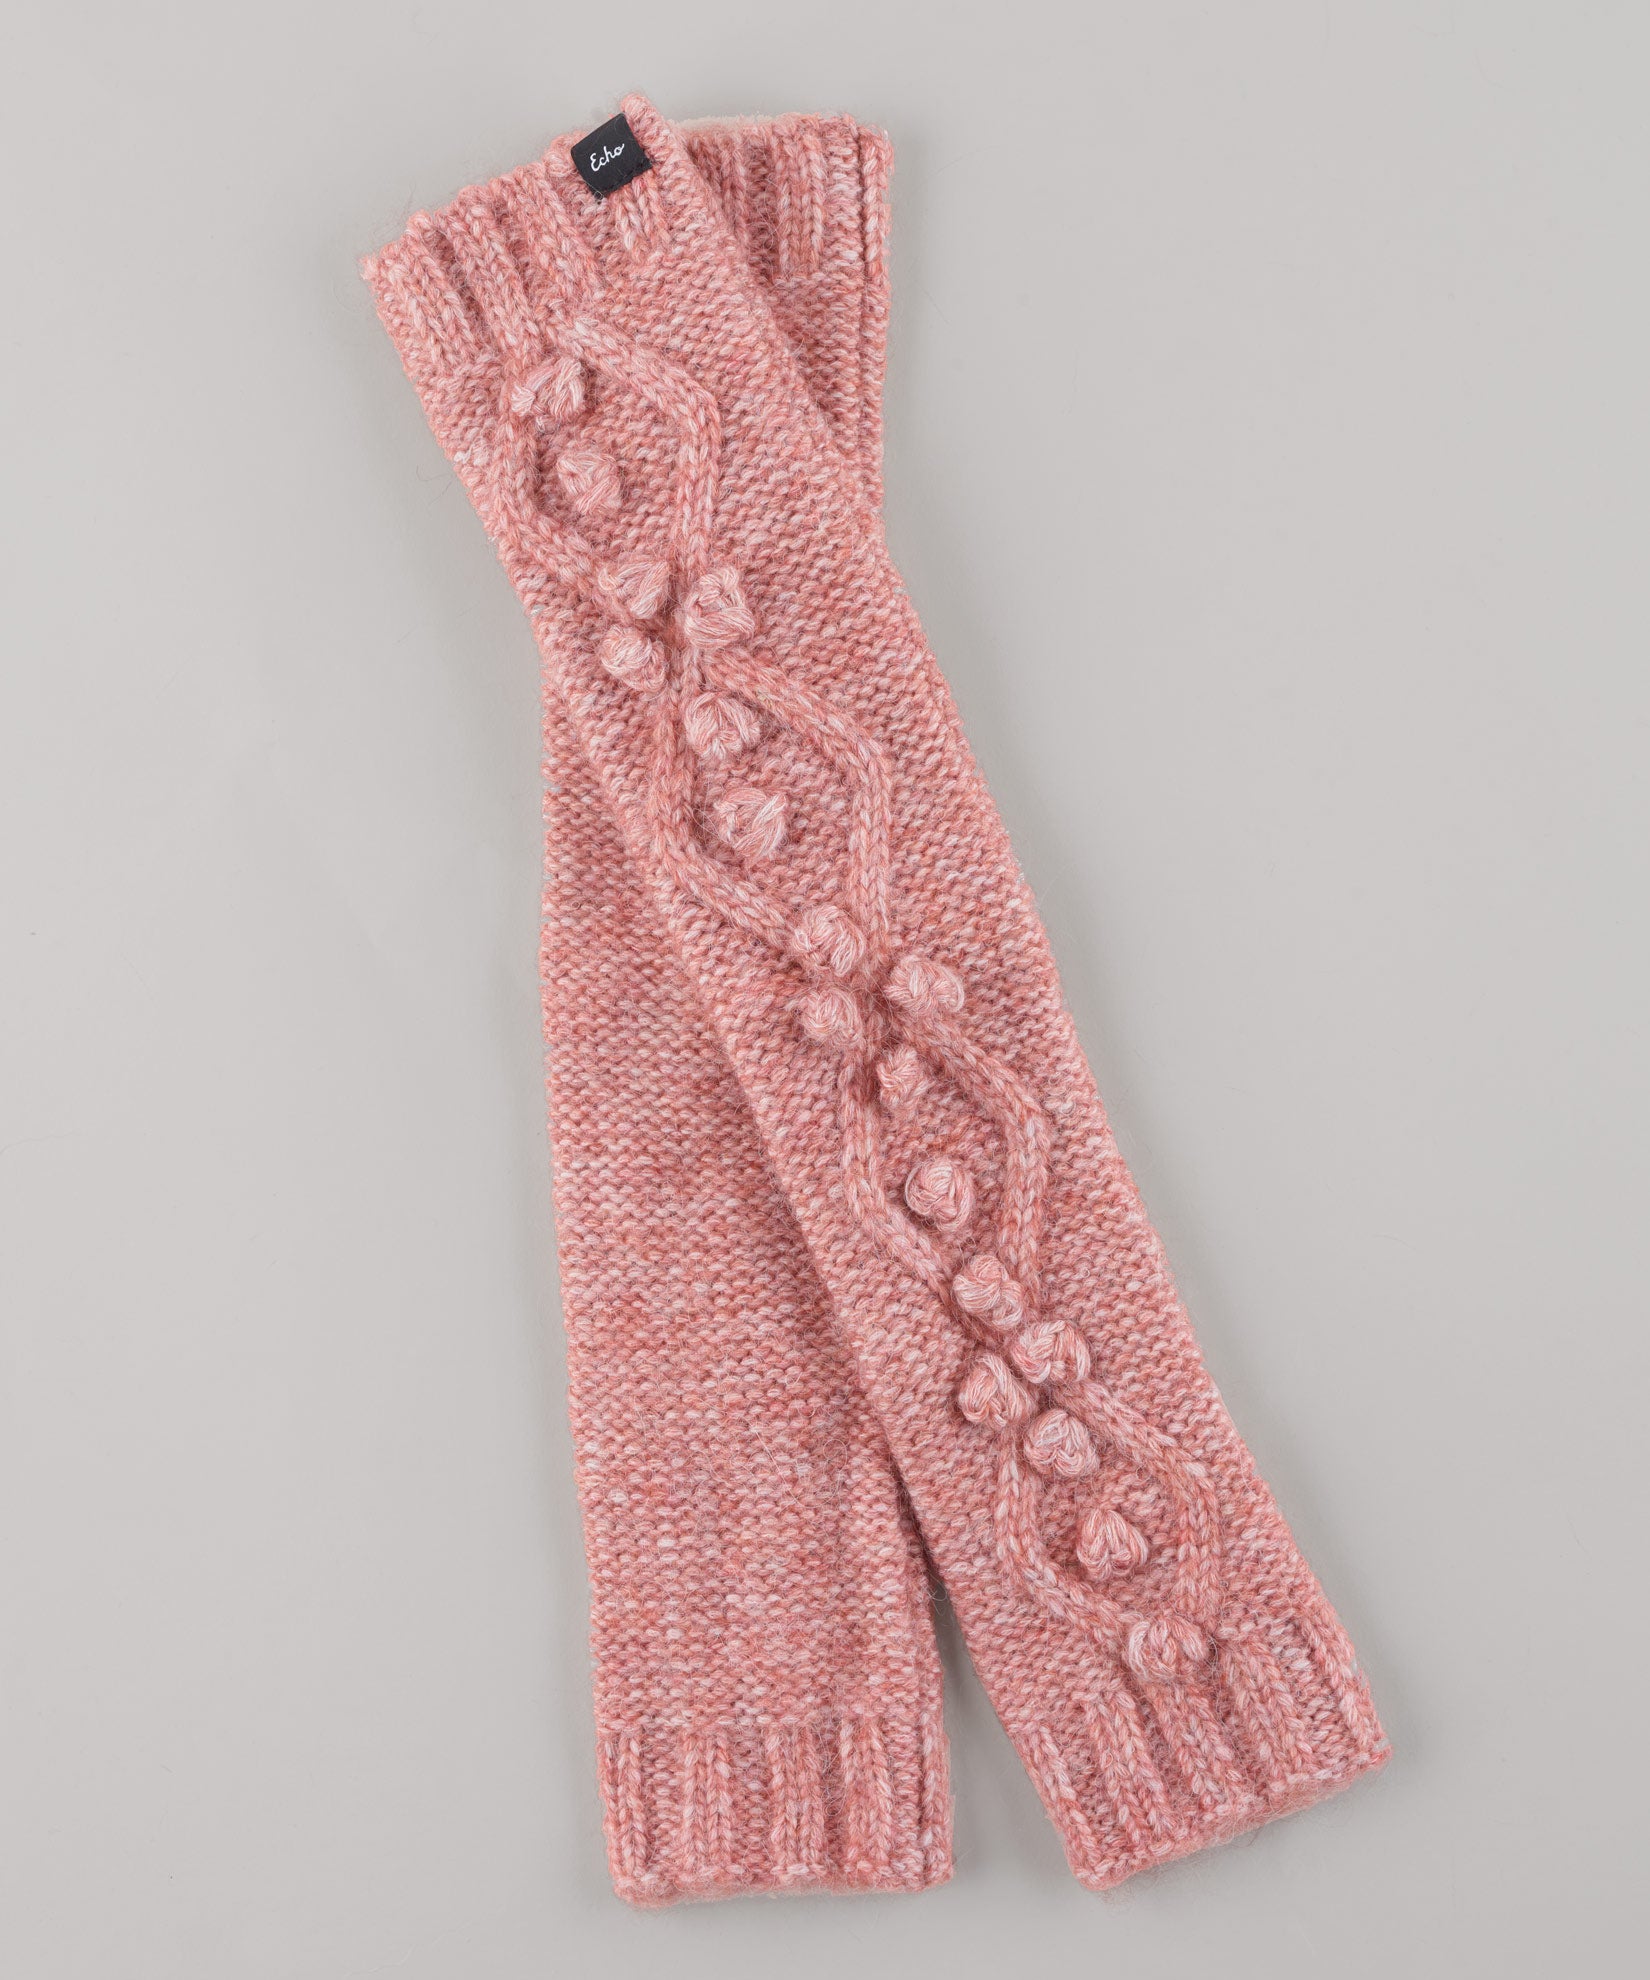 Argyle Textured Arm Warmer in color Rose Gold